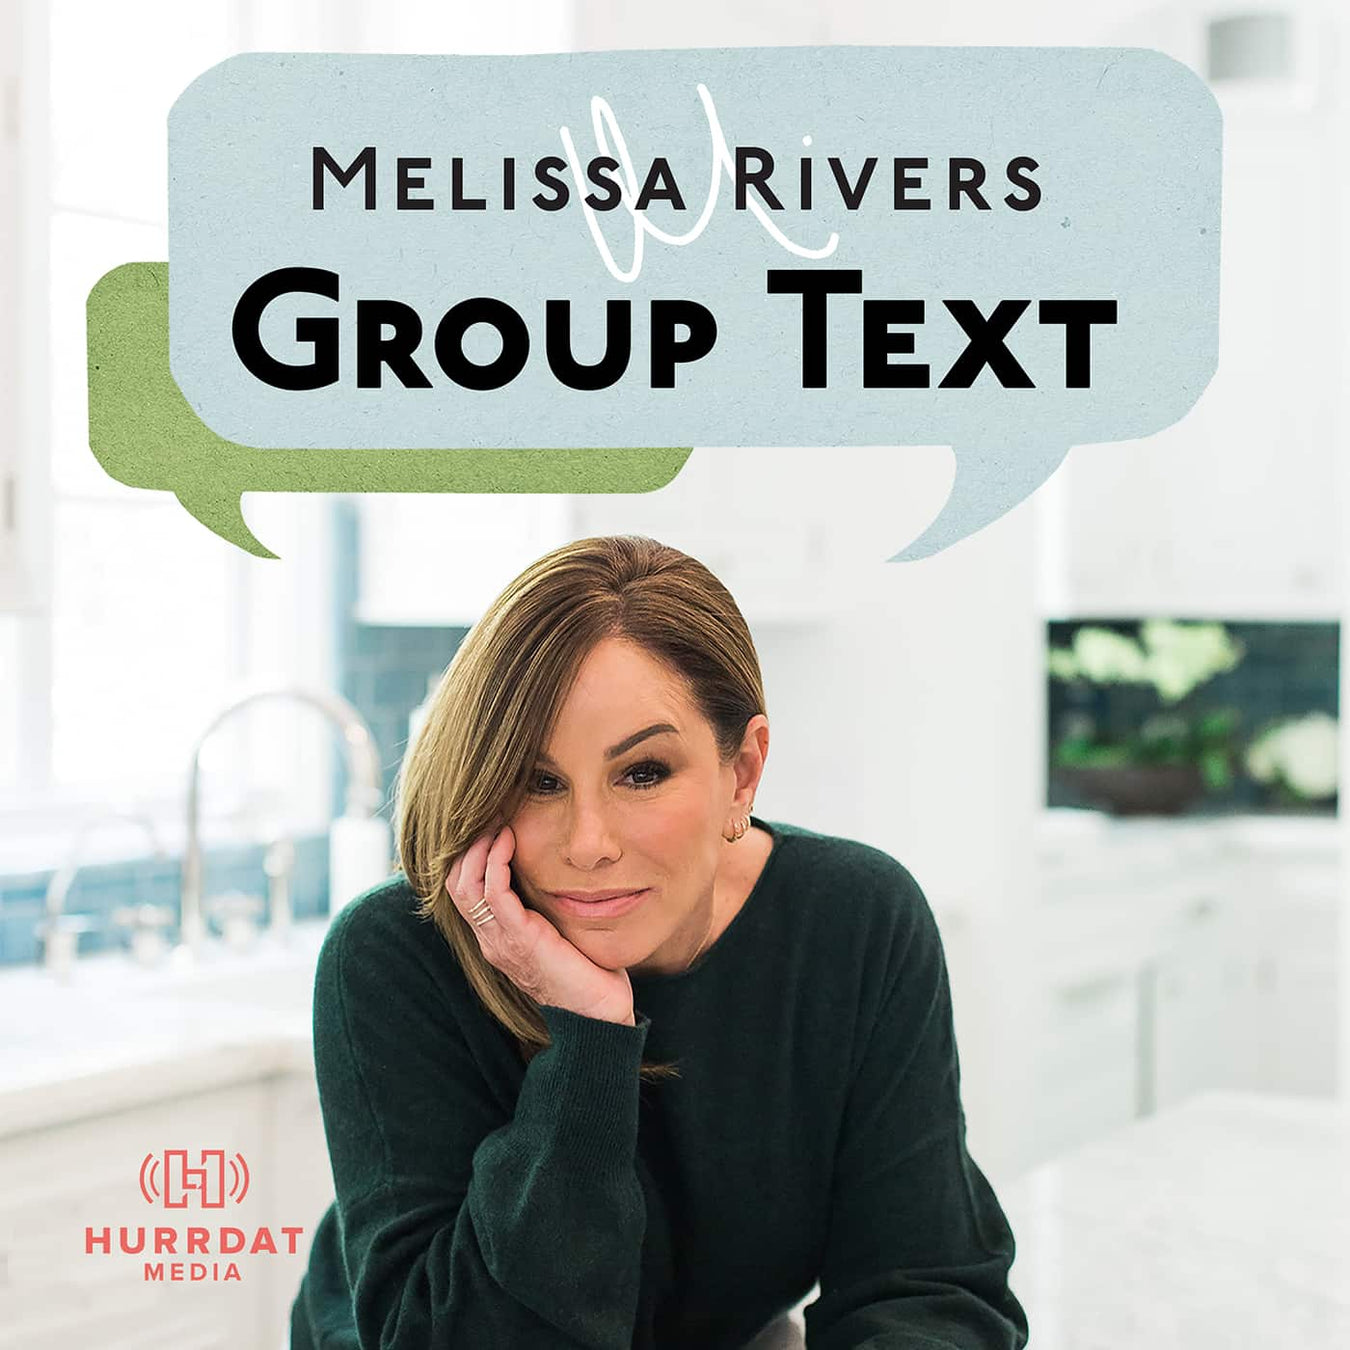 Melissa Rivers Group Text